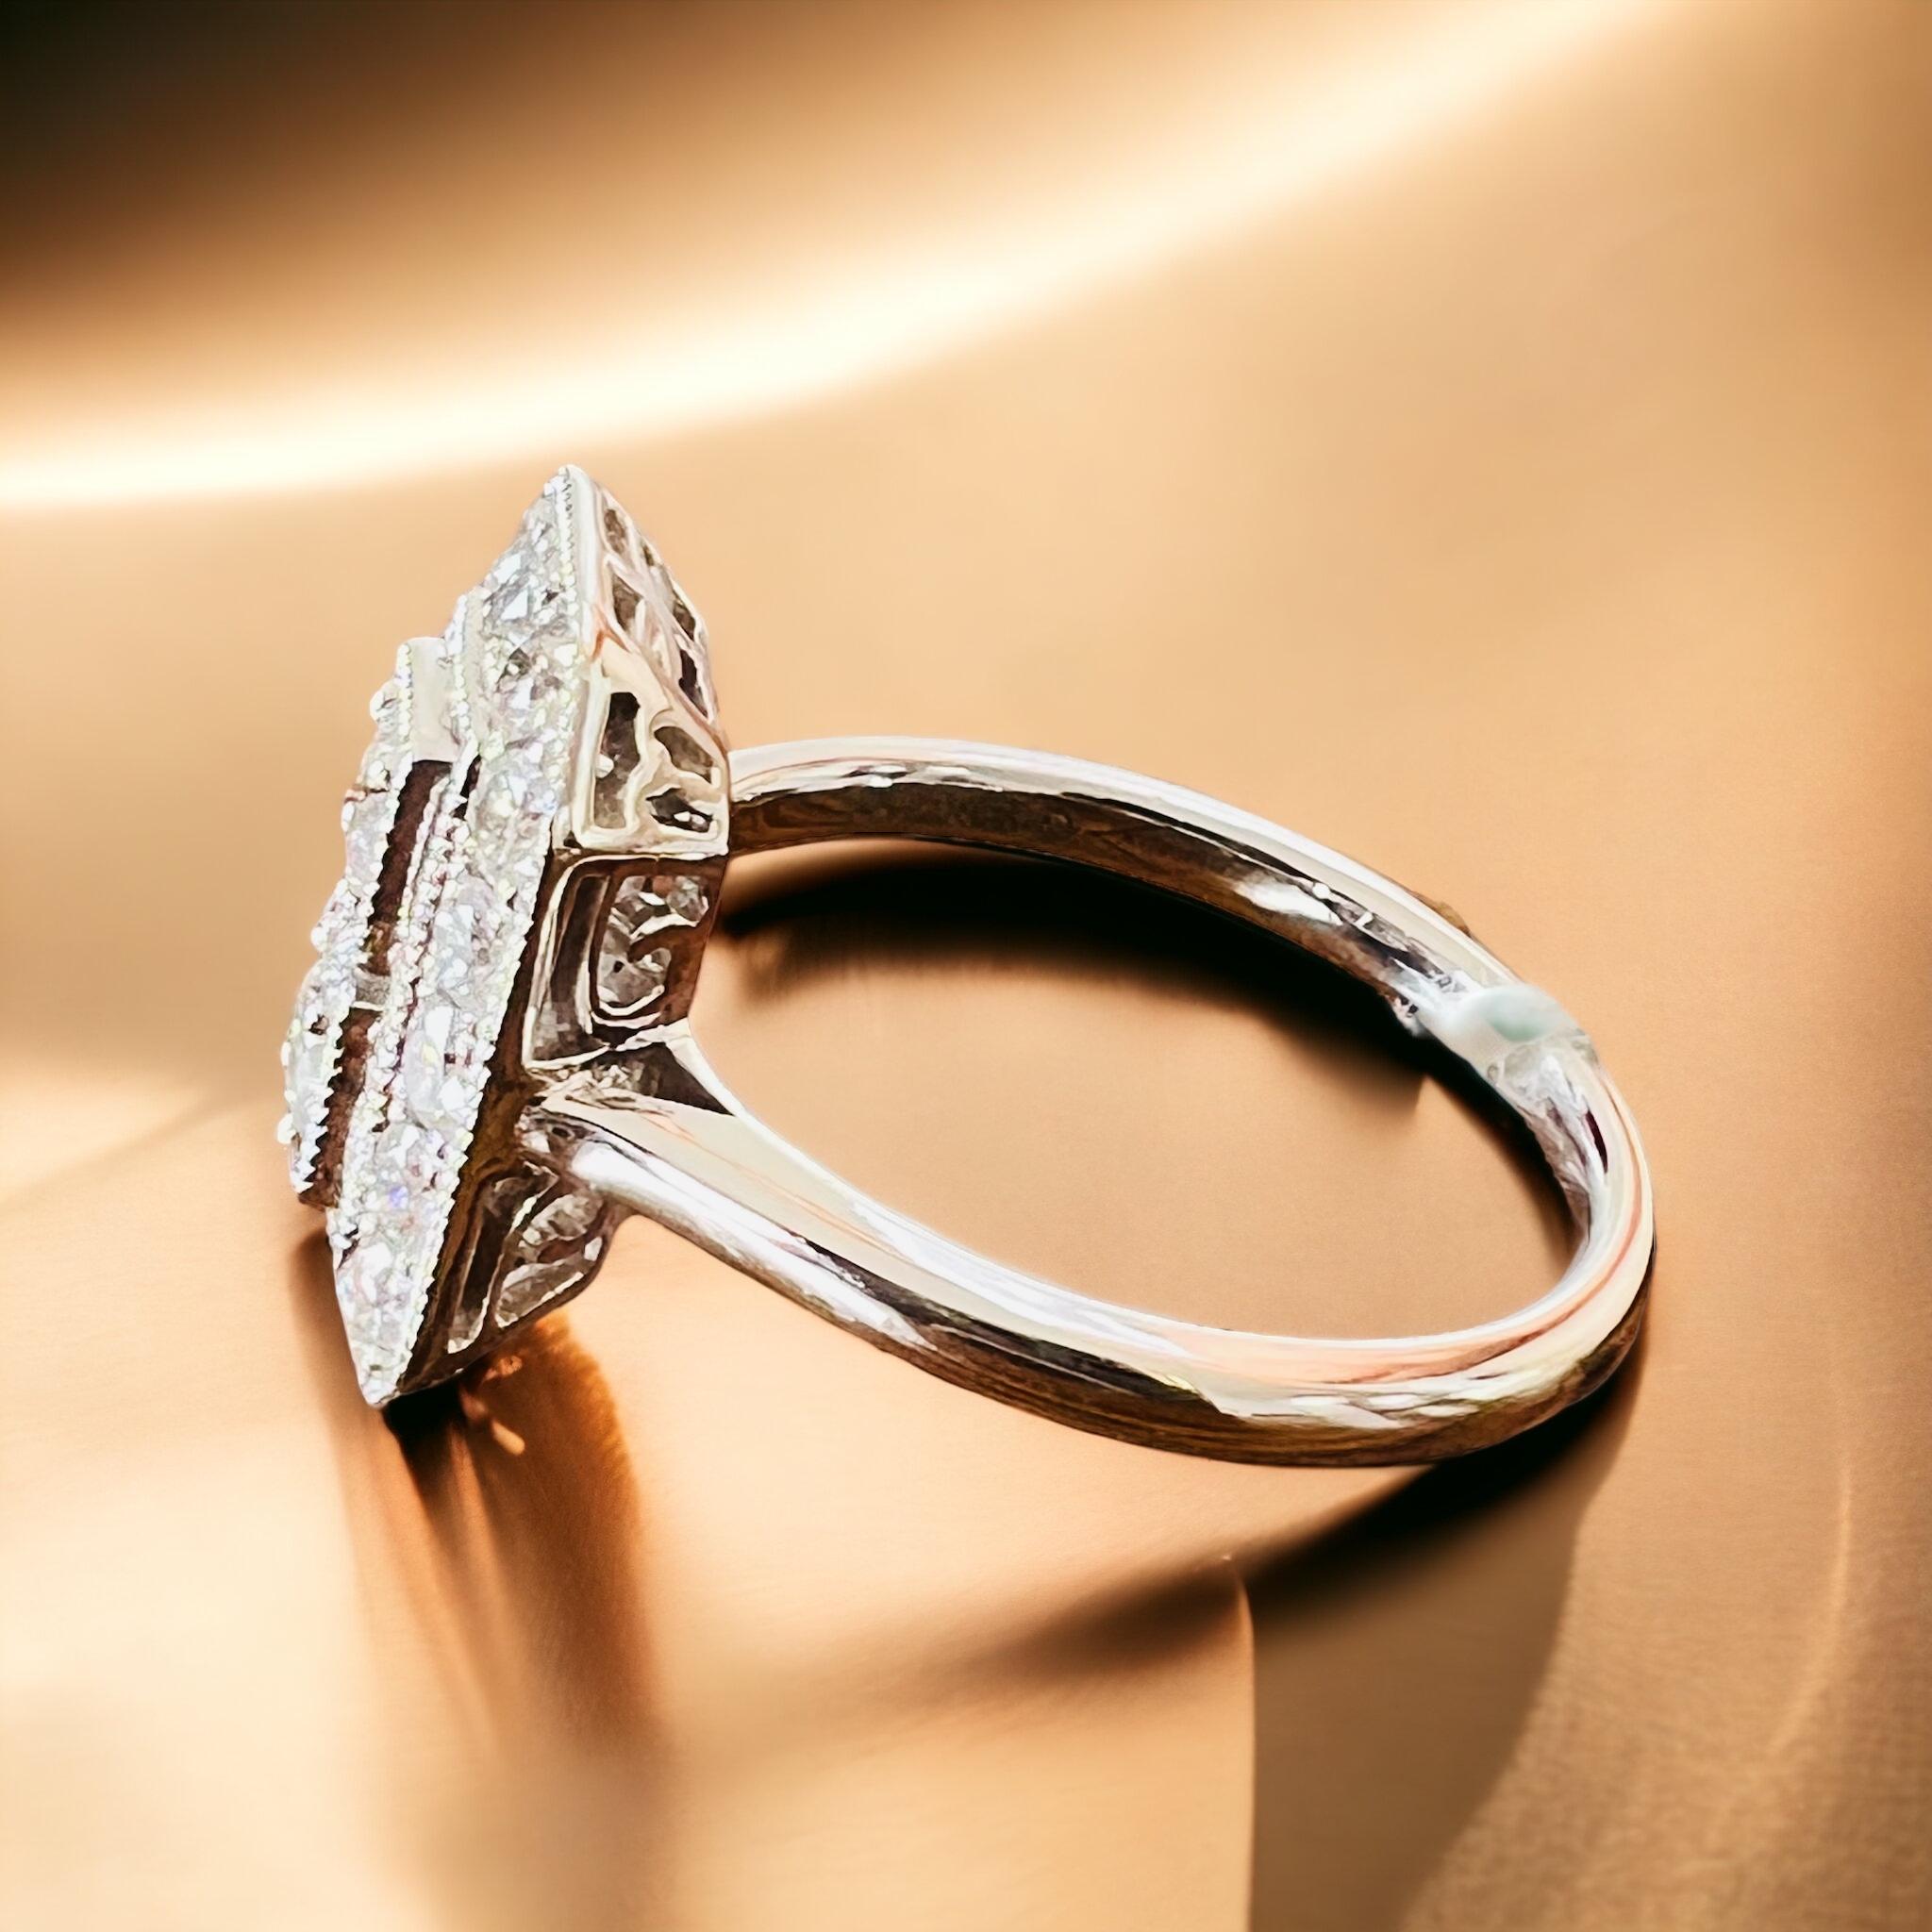 Ring In 18 Carat White Gold Set With A Paving Of Brilliants 7